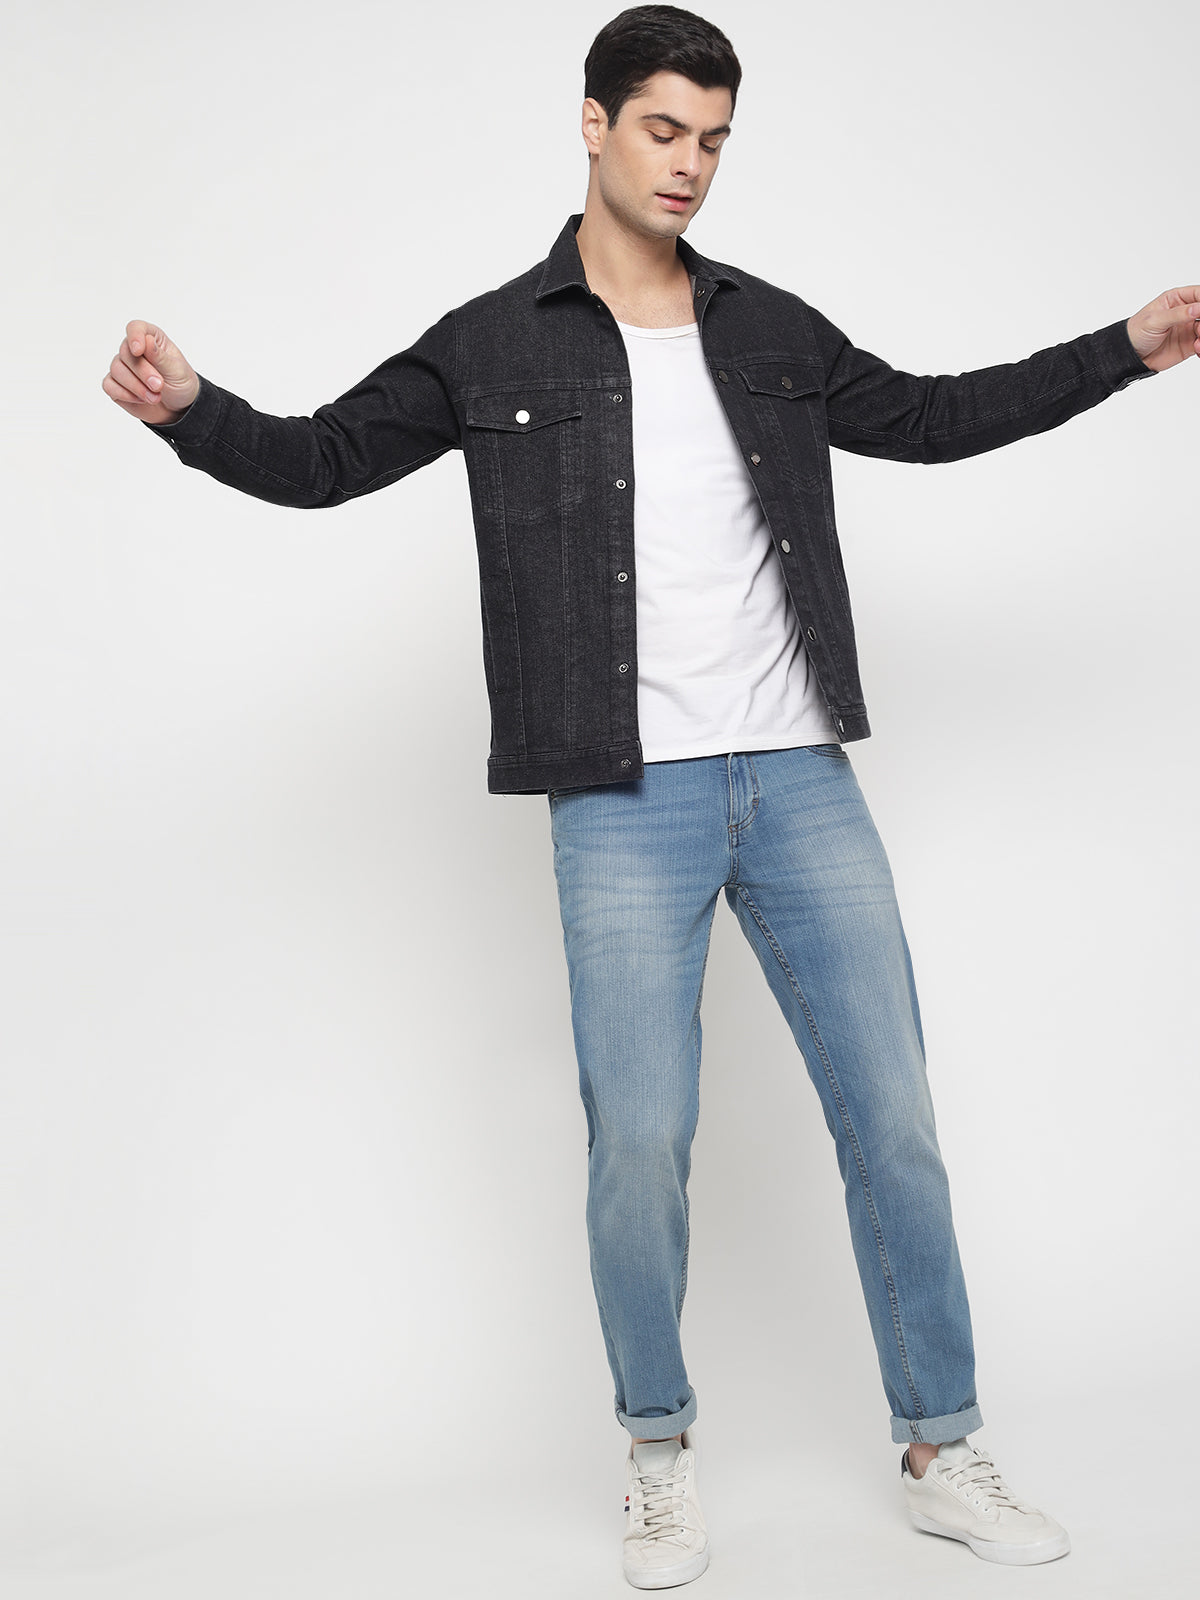 White shirt and jean jacket are a good combination! Five coordinating  samples to use as a model | Men's Fashion Media OTOKOMAE